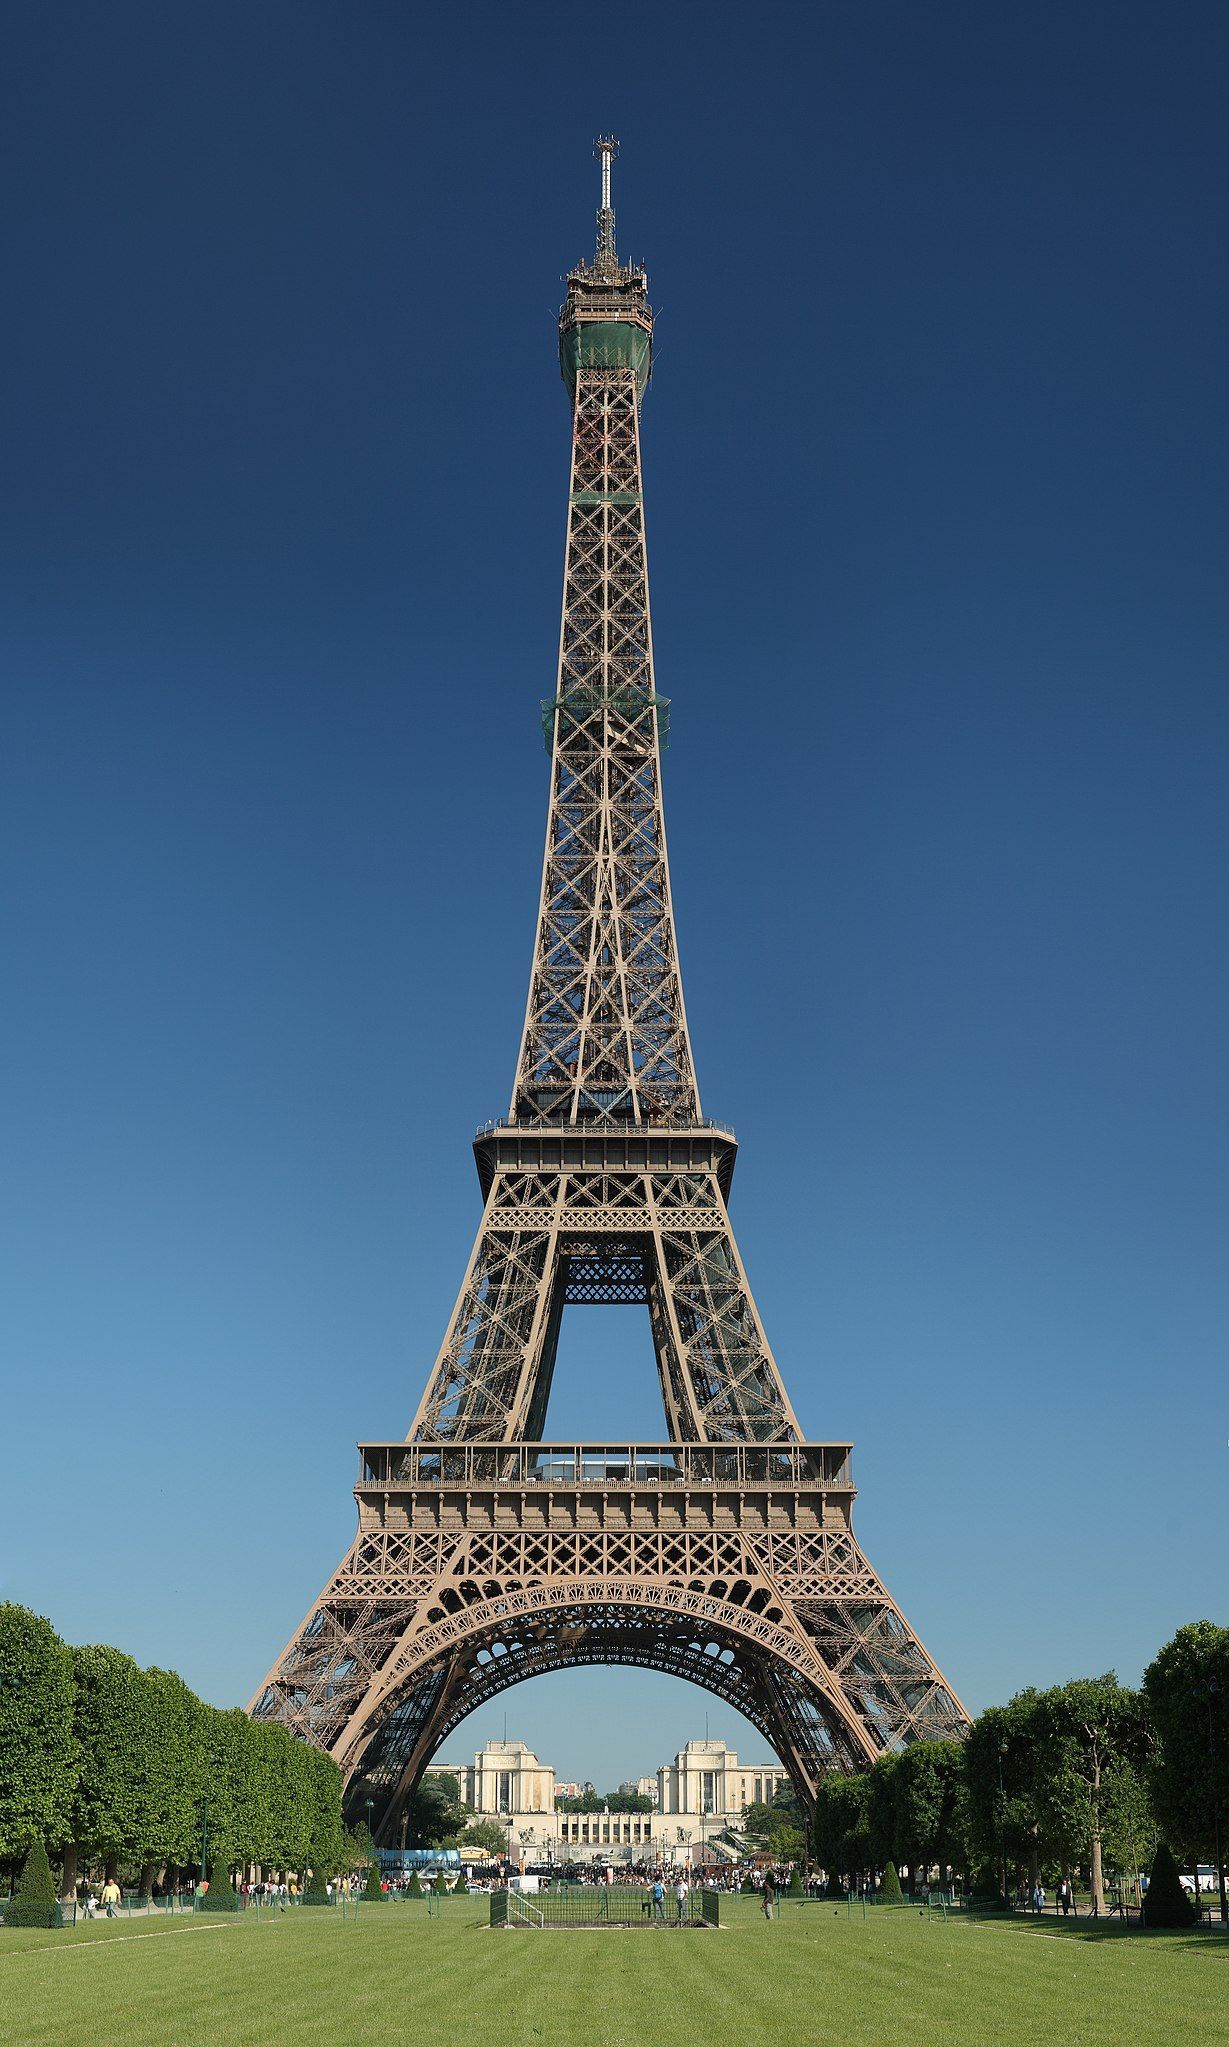 World's most visited monument with an entrance fee: The Eiffel Tower